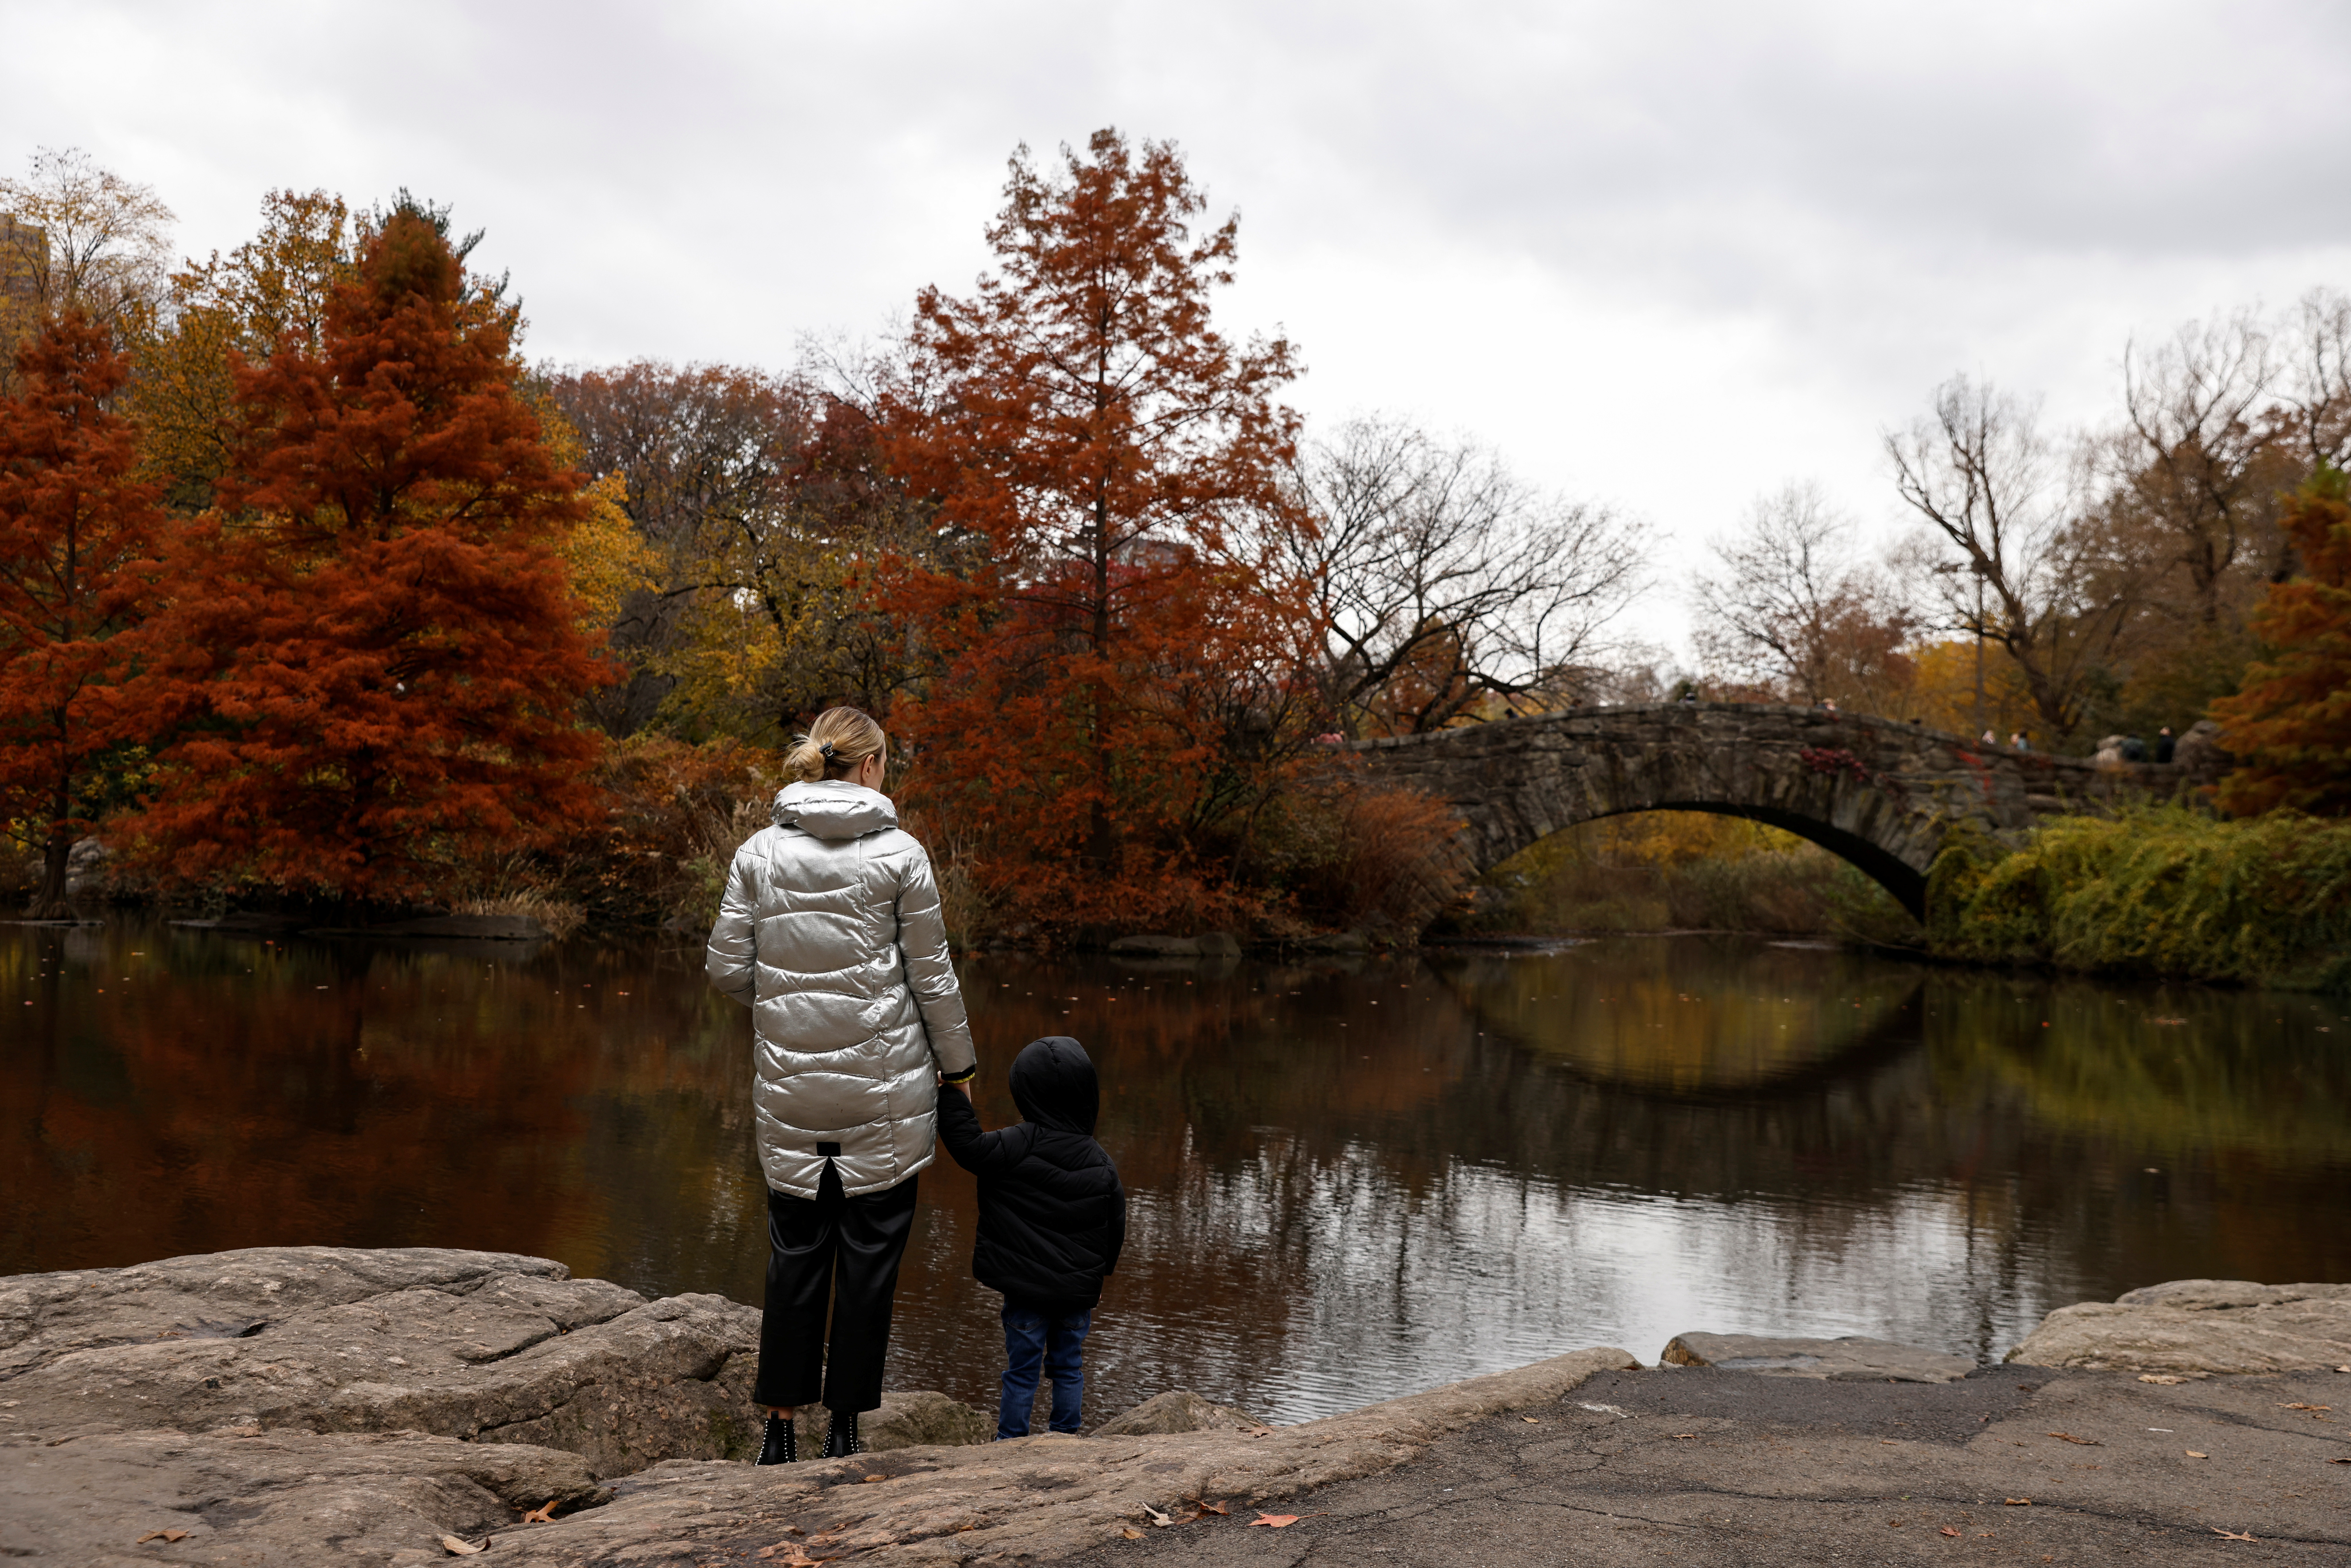 A woman holds the hand of a child by a pond at Central Park in New York City